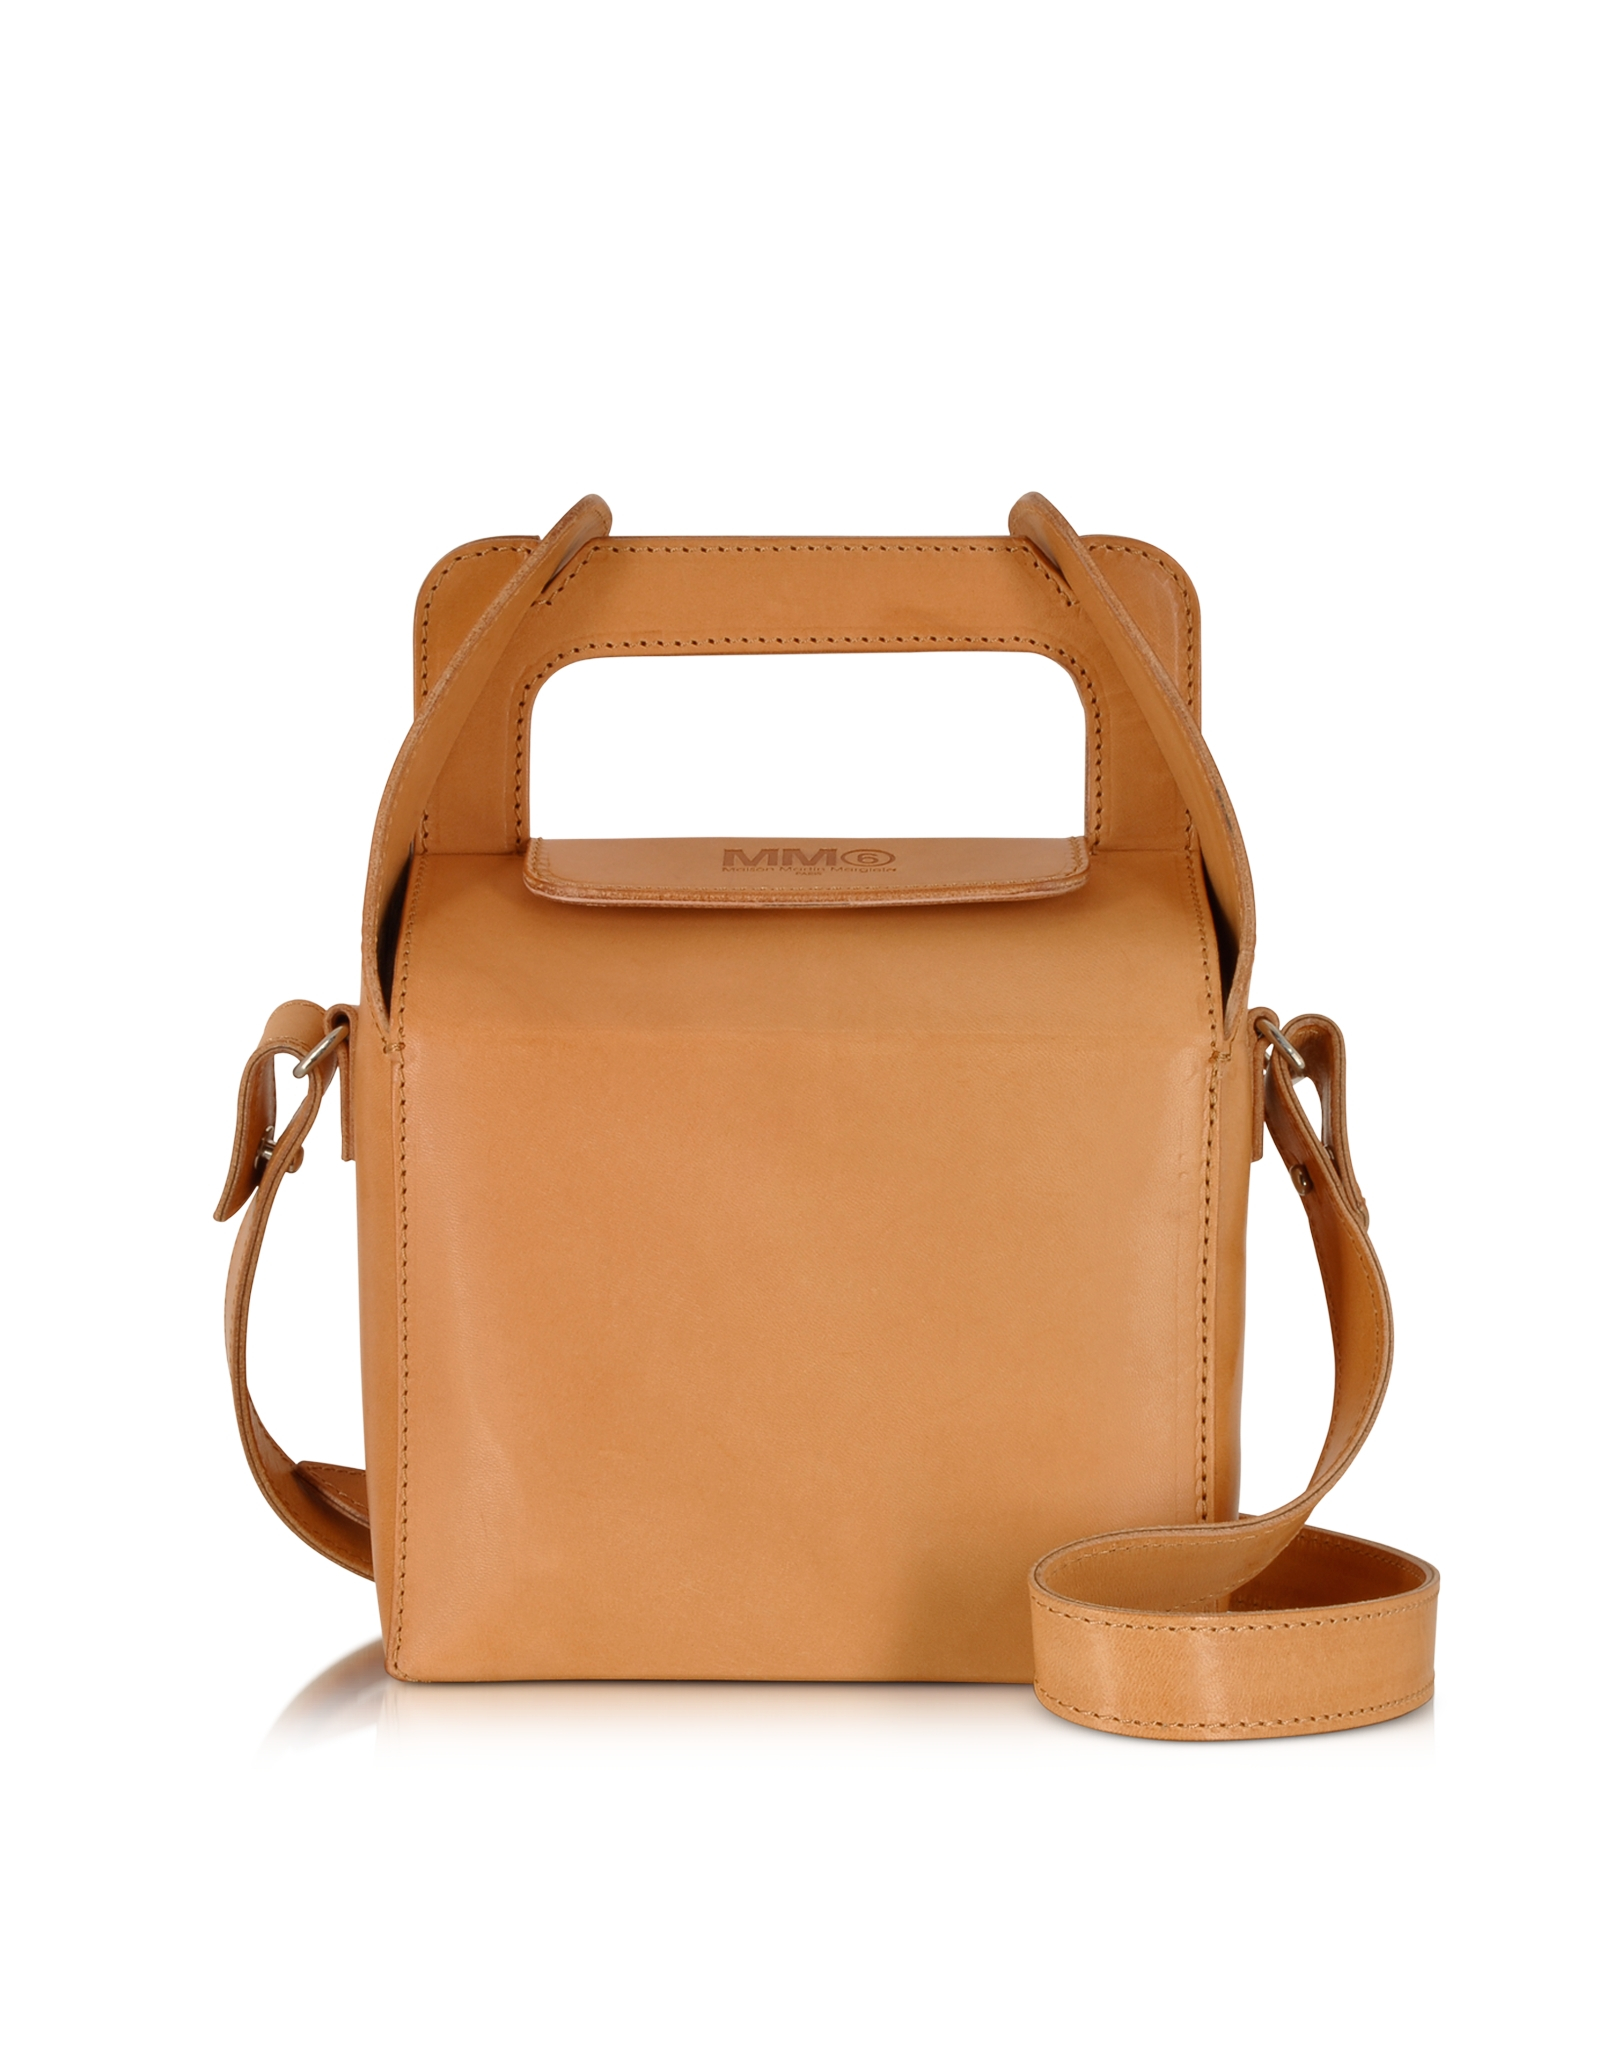 Mm6 by maison martin margiela Natural Leather Lunch Box Bag in Brown | Lyst